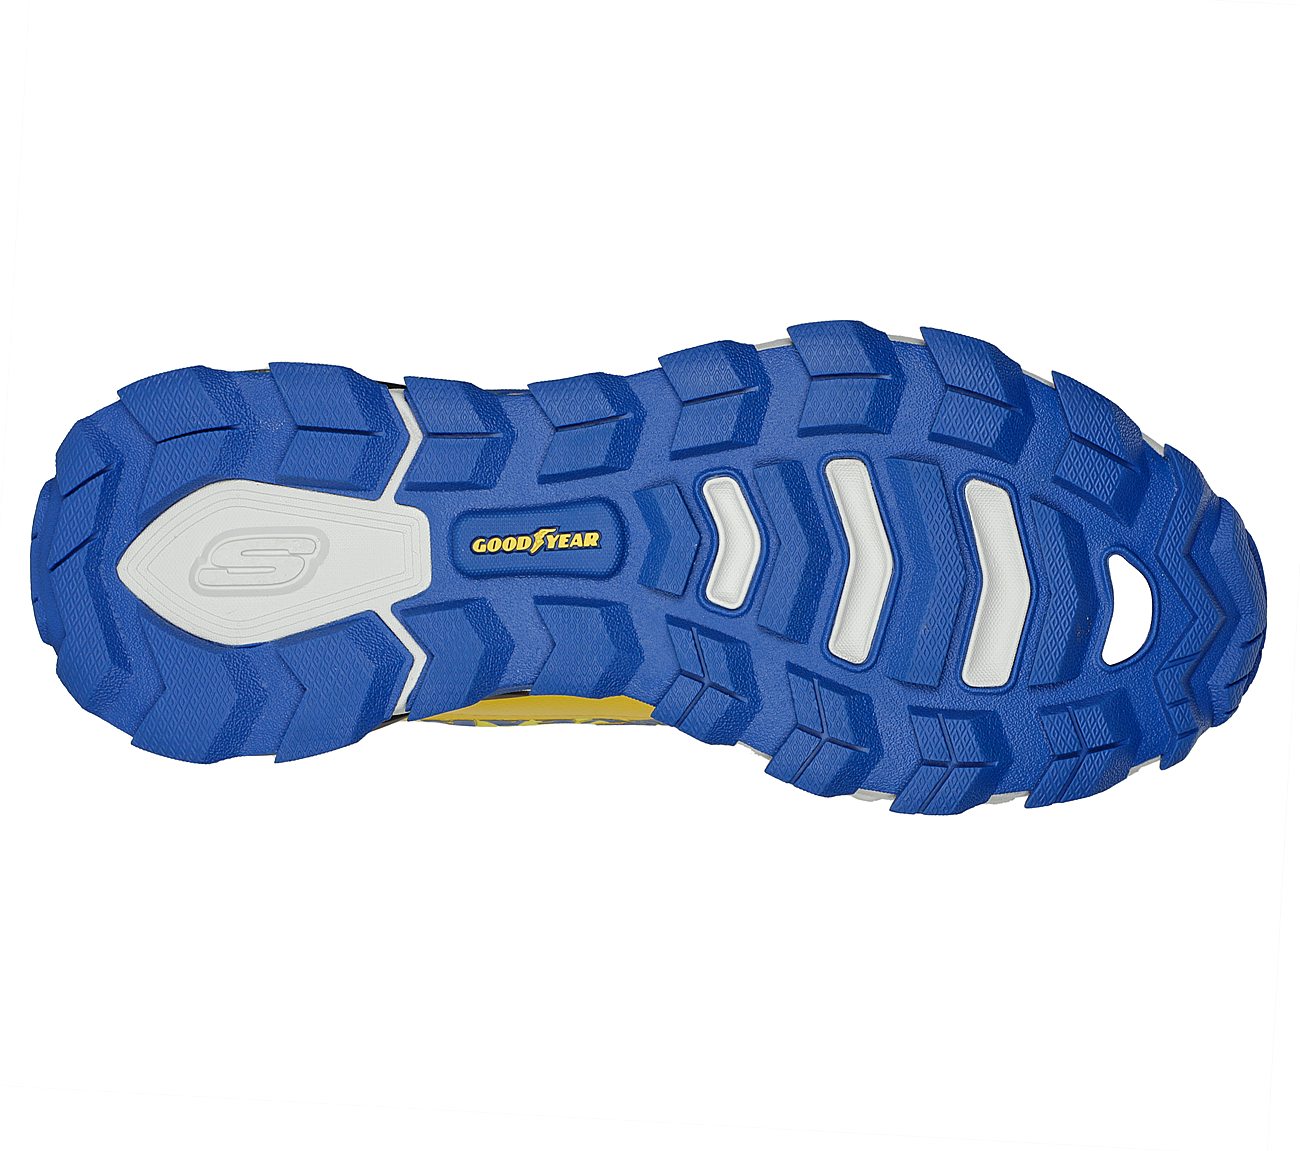 MAX PROTECT- FAST TRACK, YELLOW/BLUE Footwear Bottom View